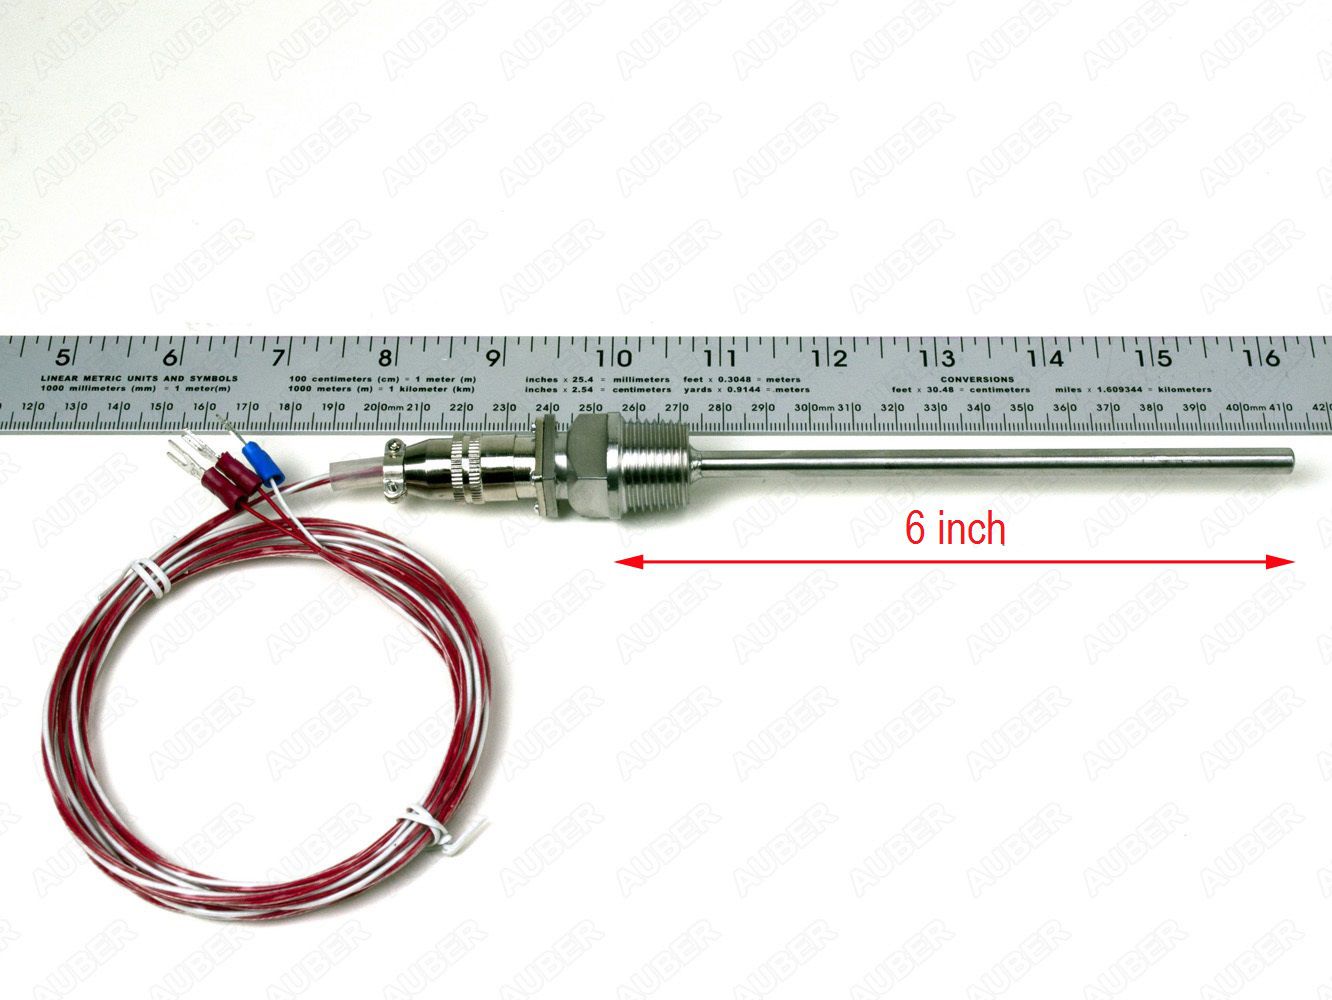 Saver RTD PT100 Temperature Sensors 1/2 inch NPT Threads with Detachable Connector 